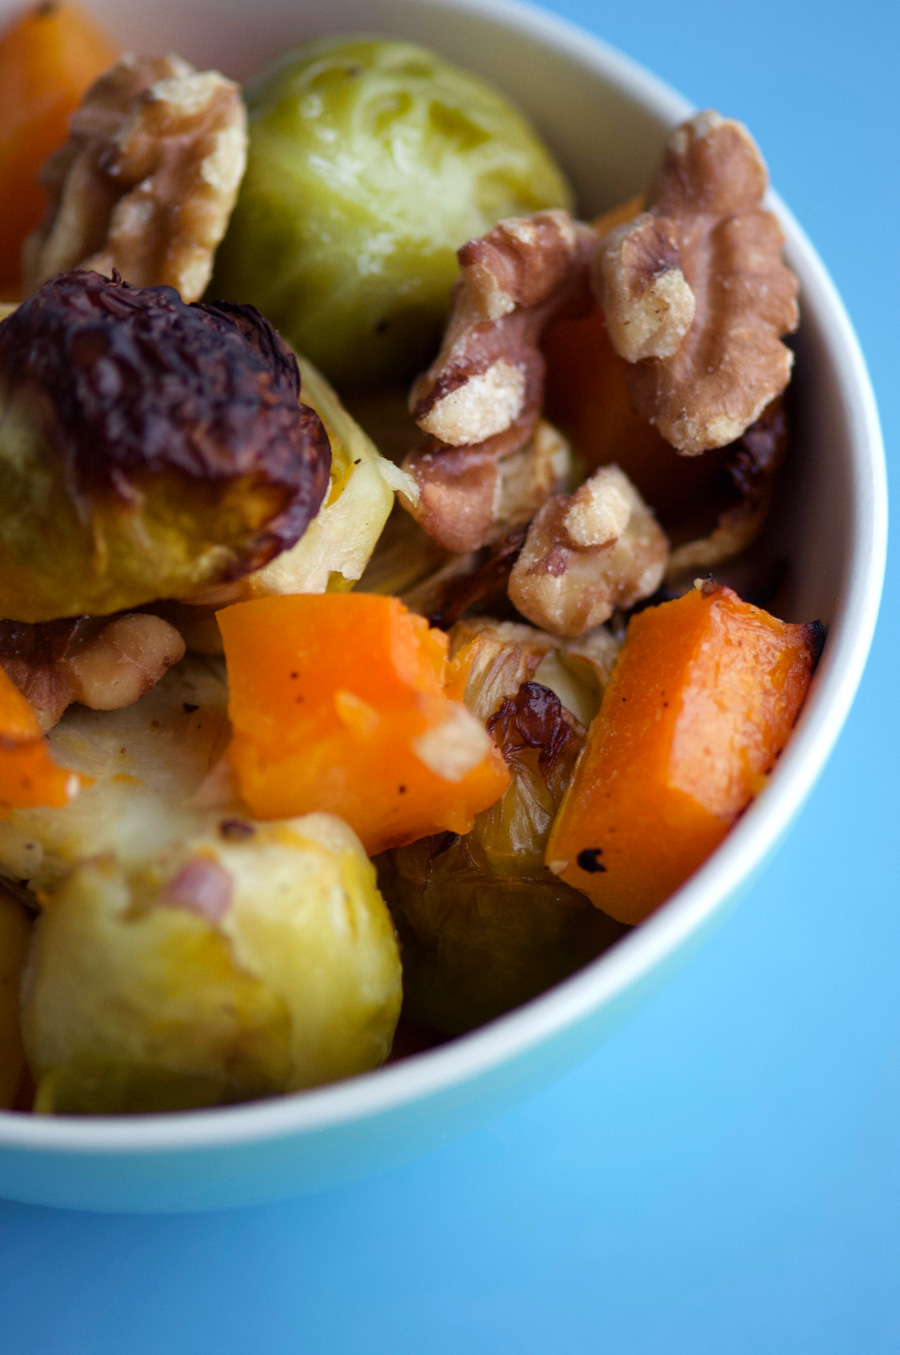 Caramelized butternut squash, brussels sprouts and apples come together with walnuts and maple syrup for a delightful veg side dish